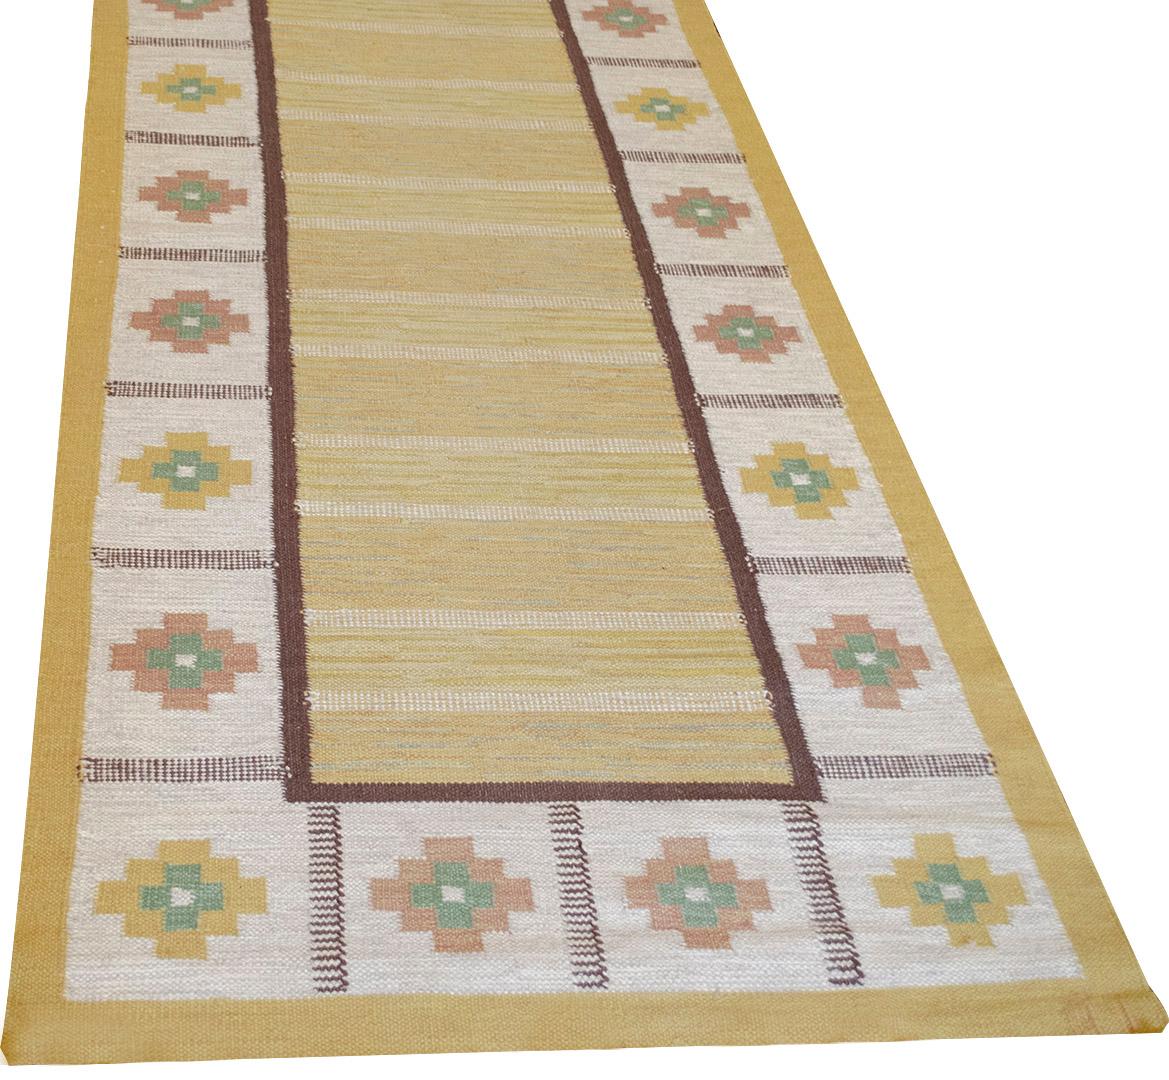 This traditional handwoven Swedish rug has a yellow field enclosed in a thin brown rectangle surrounded by an ivory field of alternating brown and yellow lozenges with an outer yellow border. An excellent example of Swedish weaving.
   